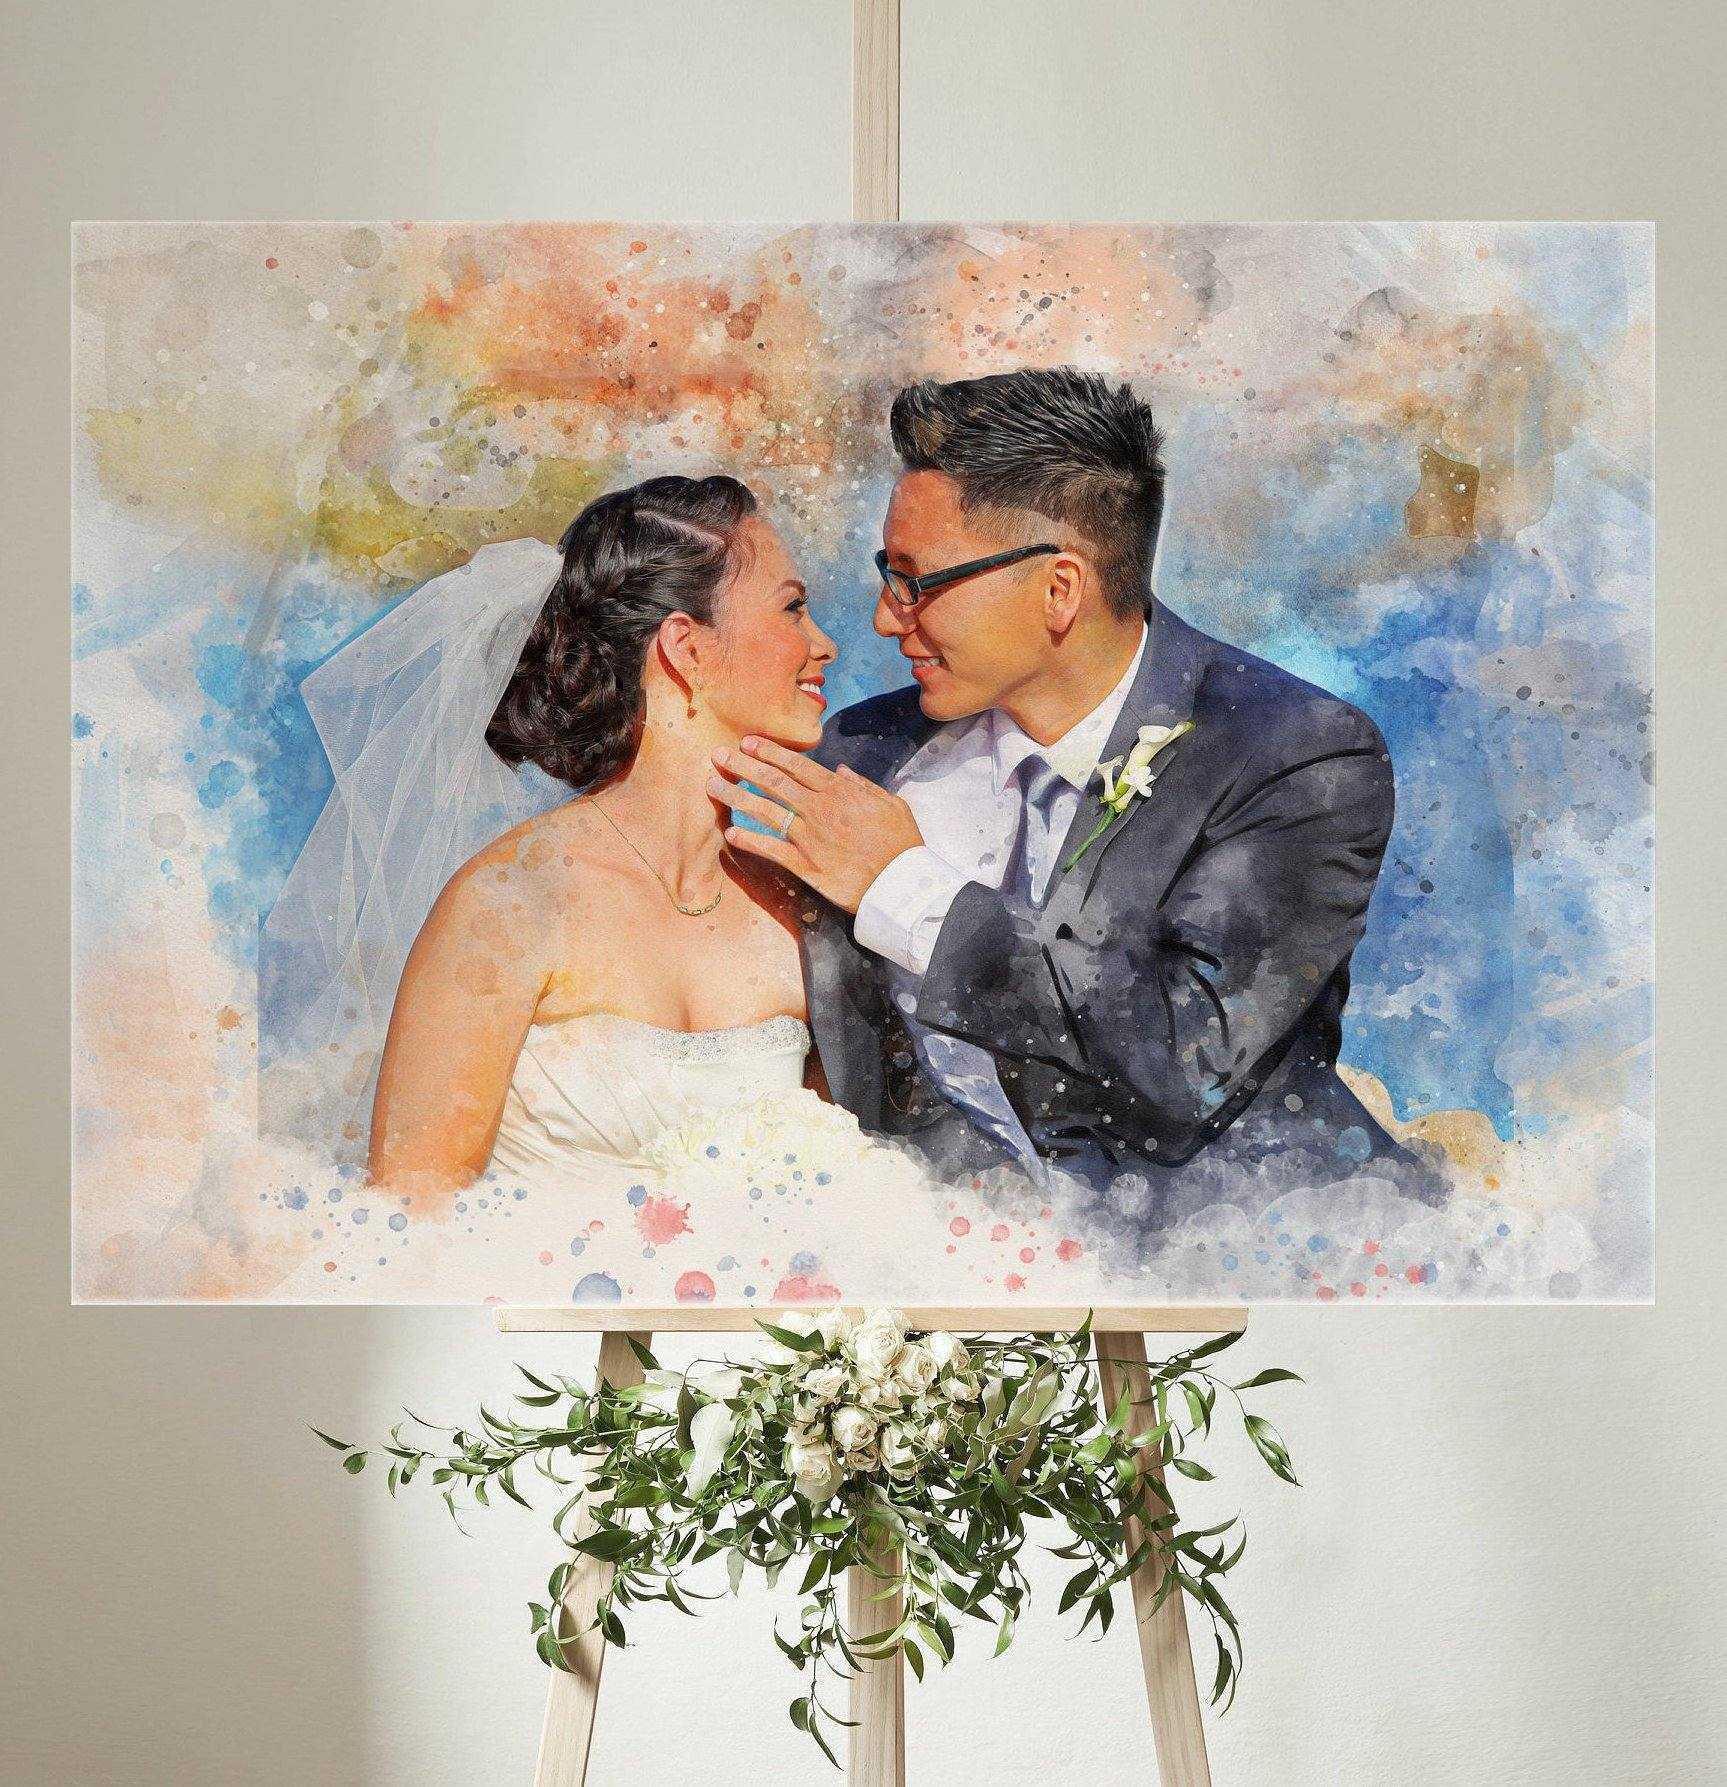 Custom Painted Portraits, From Photo to Painting - FromPicToArt